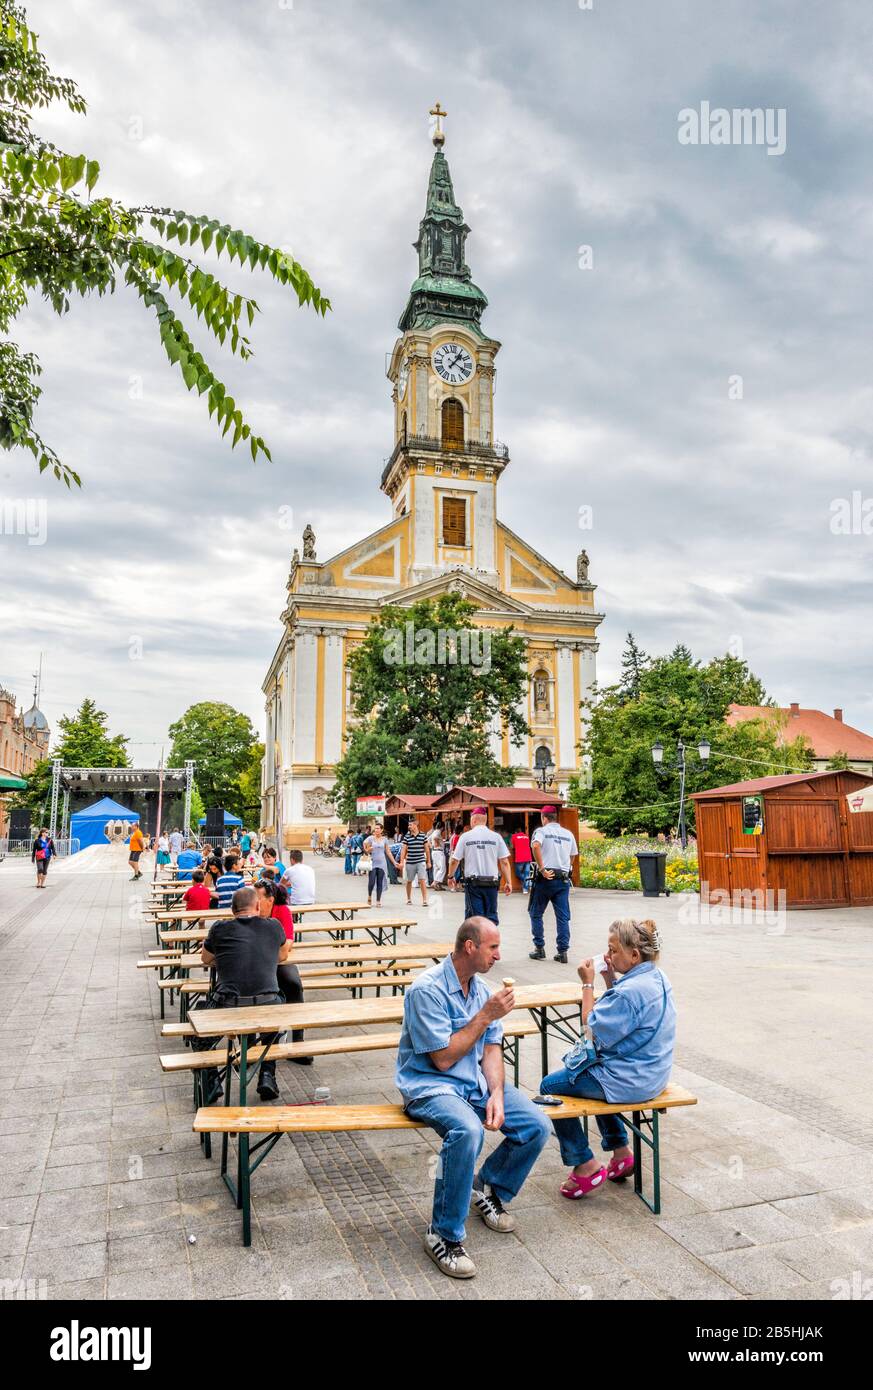 People at outdoor tables at Kossuth Square, Great Church behind, in Kecskemet, Southern Great Hungarian Plain region, Bacs-Kiskun County, Hungary Stock Photo